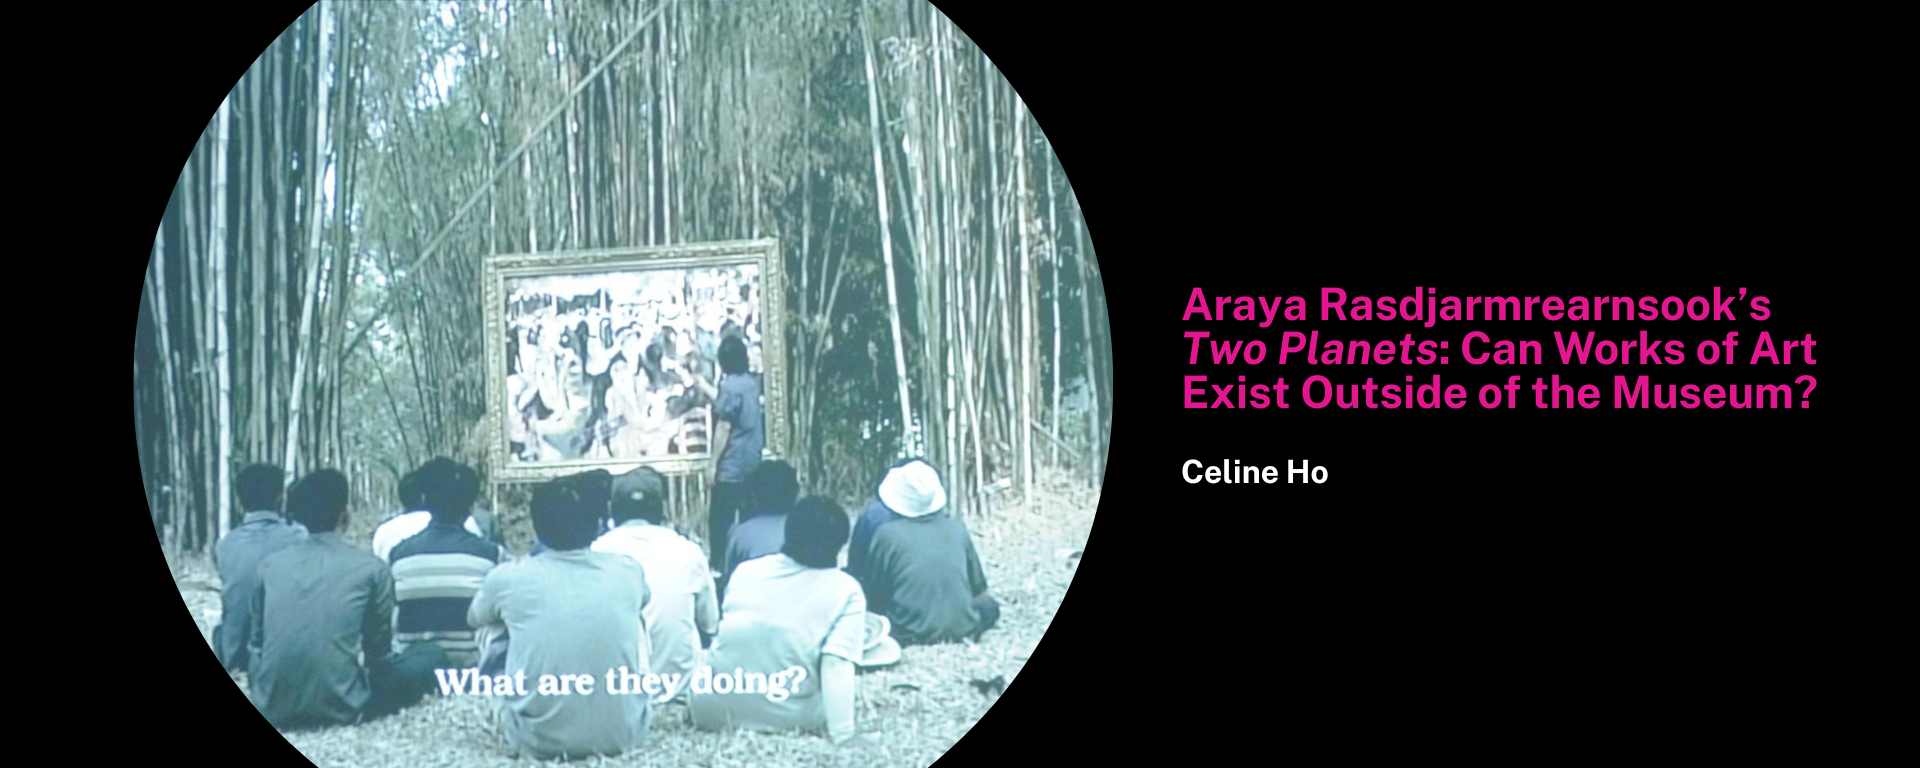 Araya Rasdjarmrearnsook’s Two Planets: Can Works of Art Exist Outside of the Museum?